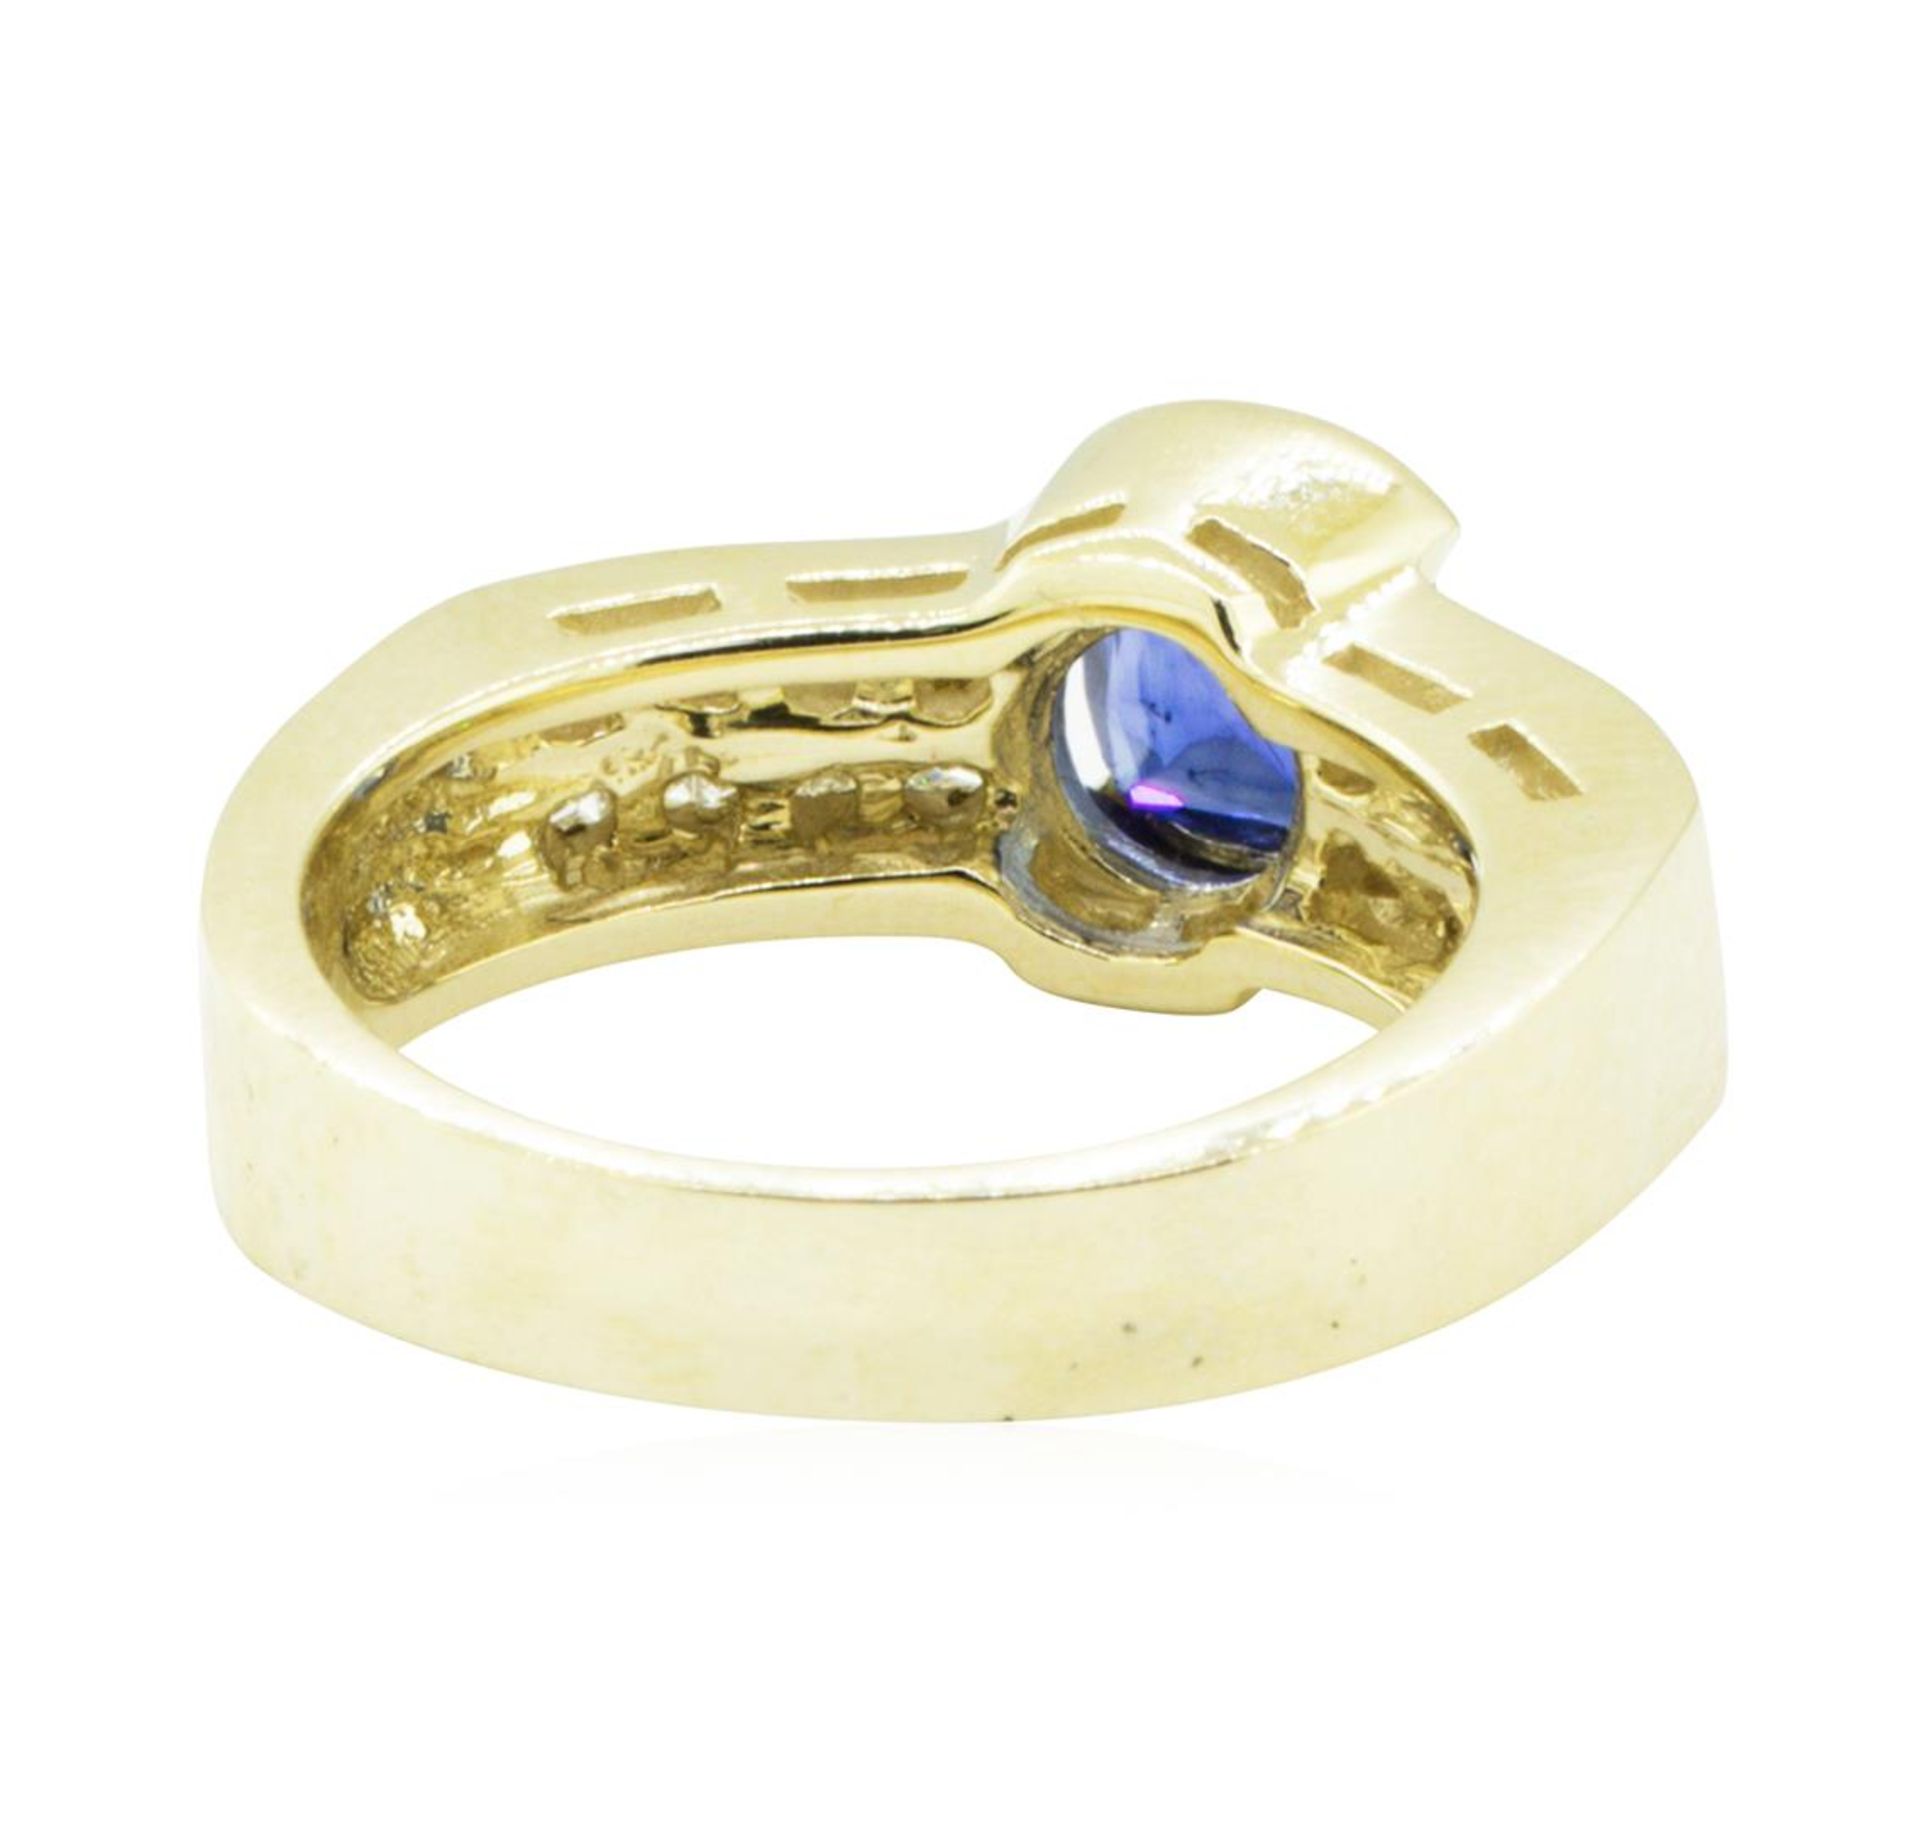 1.37 ctw Square Cushion Brilliant Blue Sapphire And Diamond Ring - 14KT Yellow G - Image 3 of 5